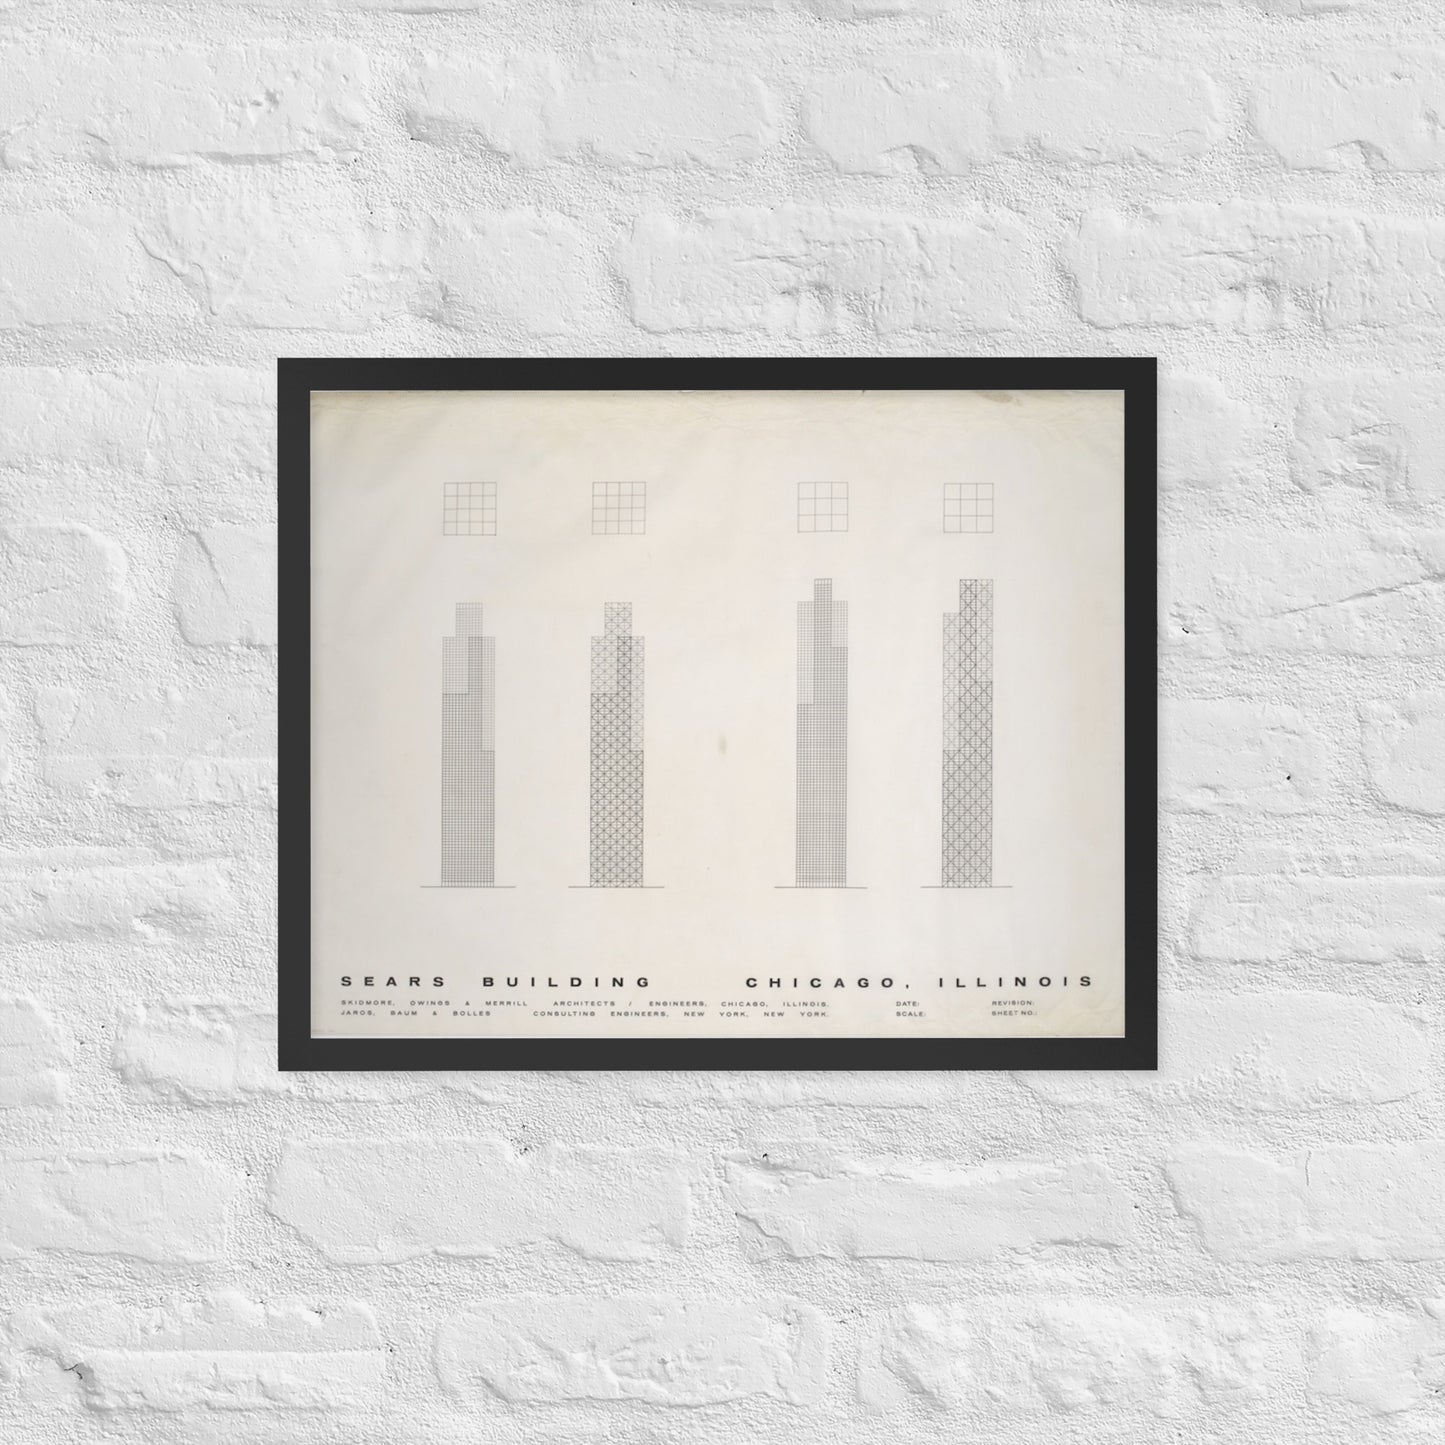 Sears Building Skidmore, Owings & Merrill (Architect) Drawing - Framed poster